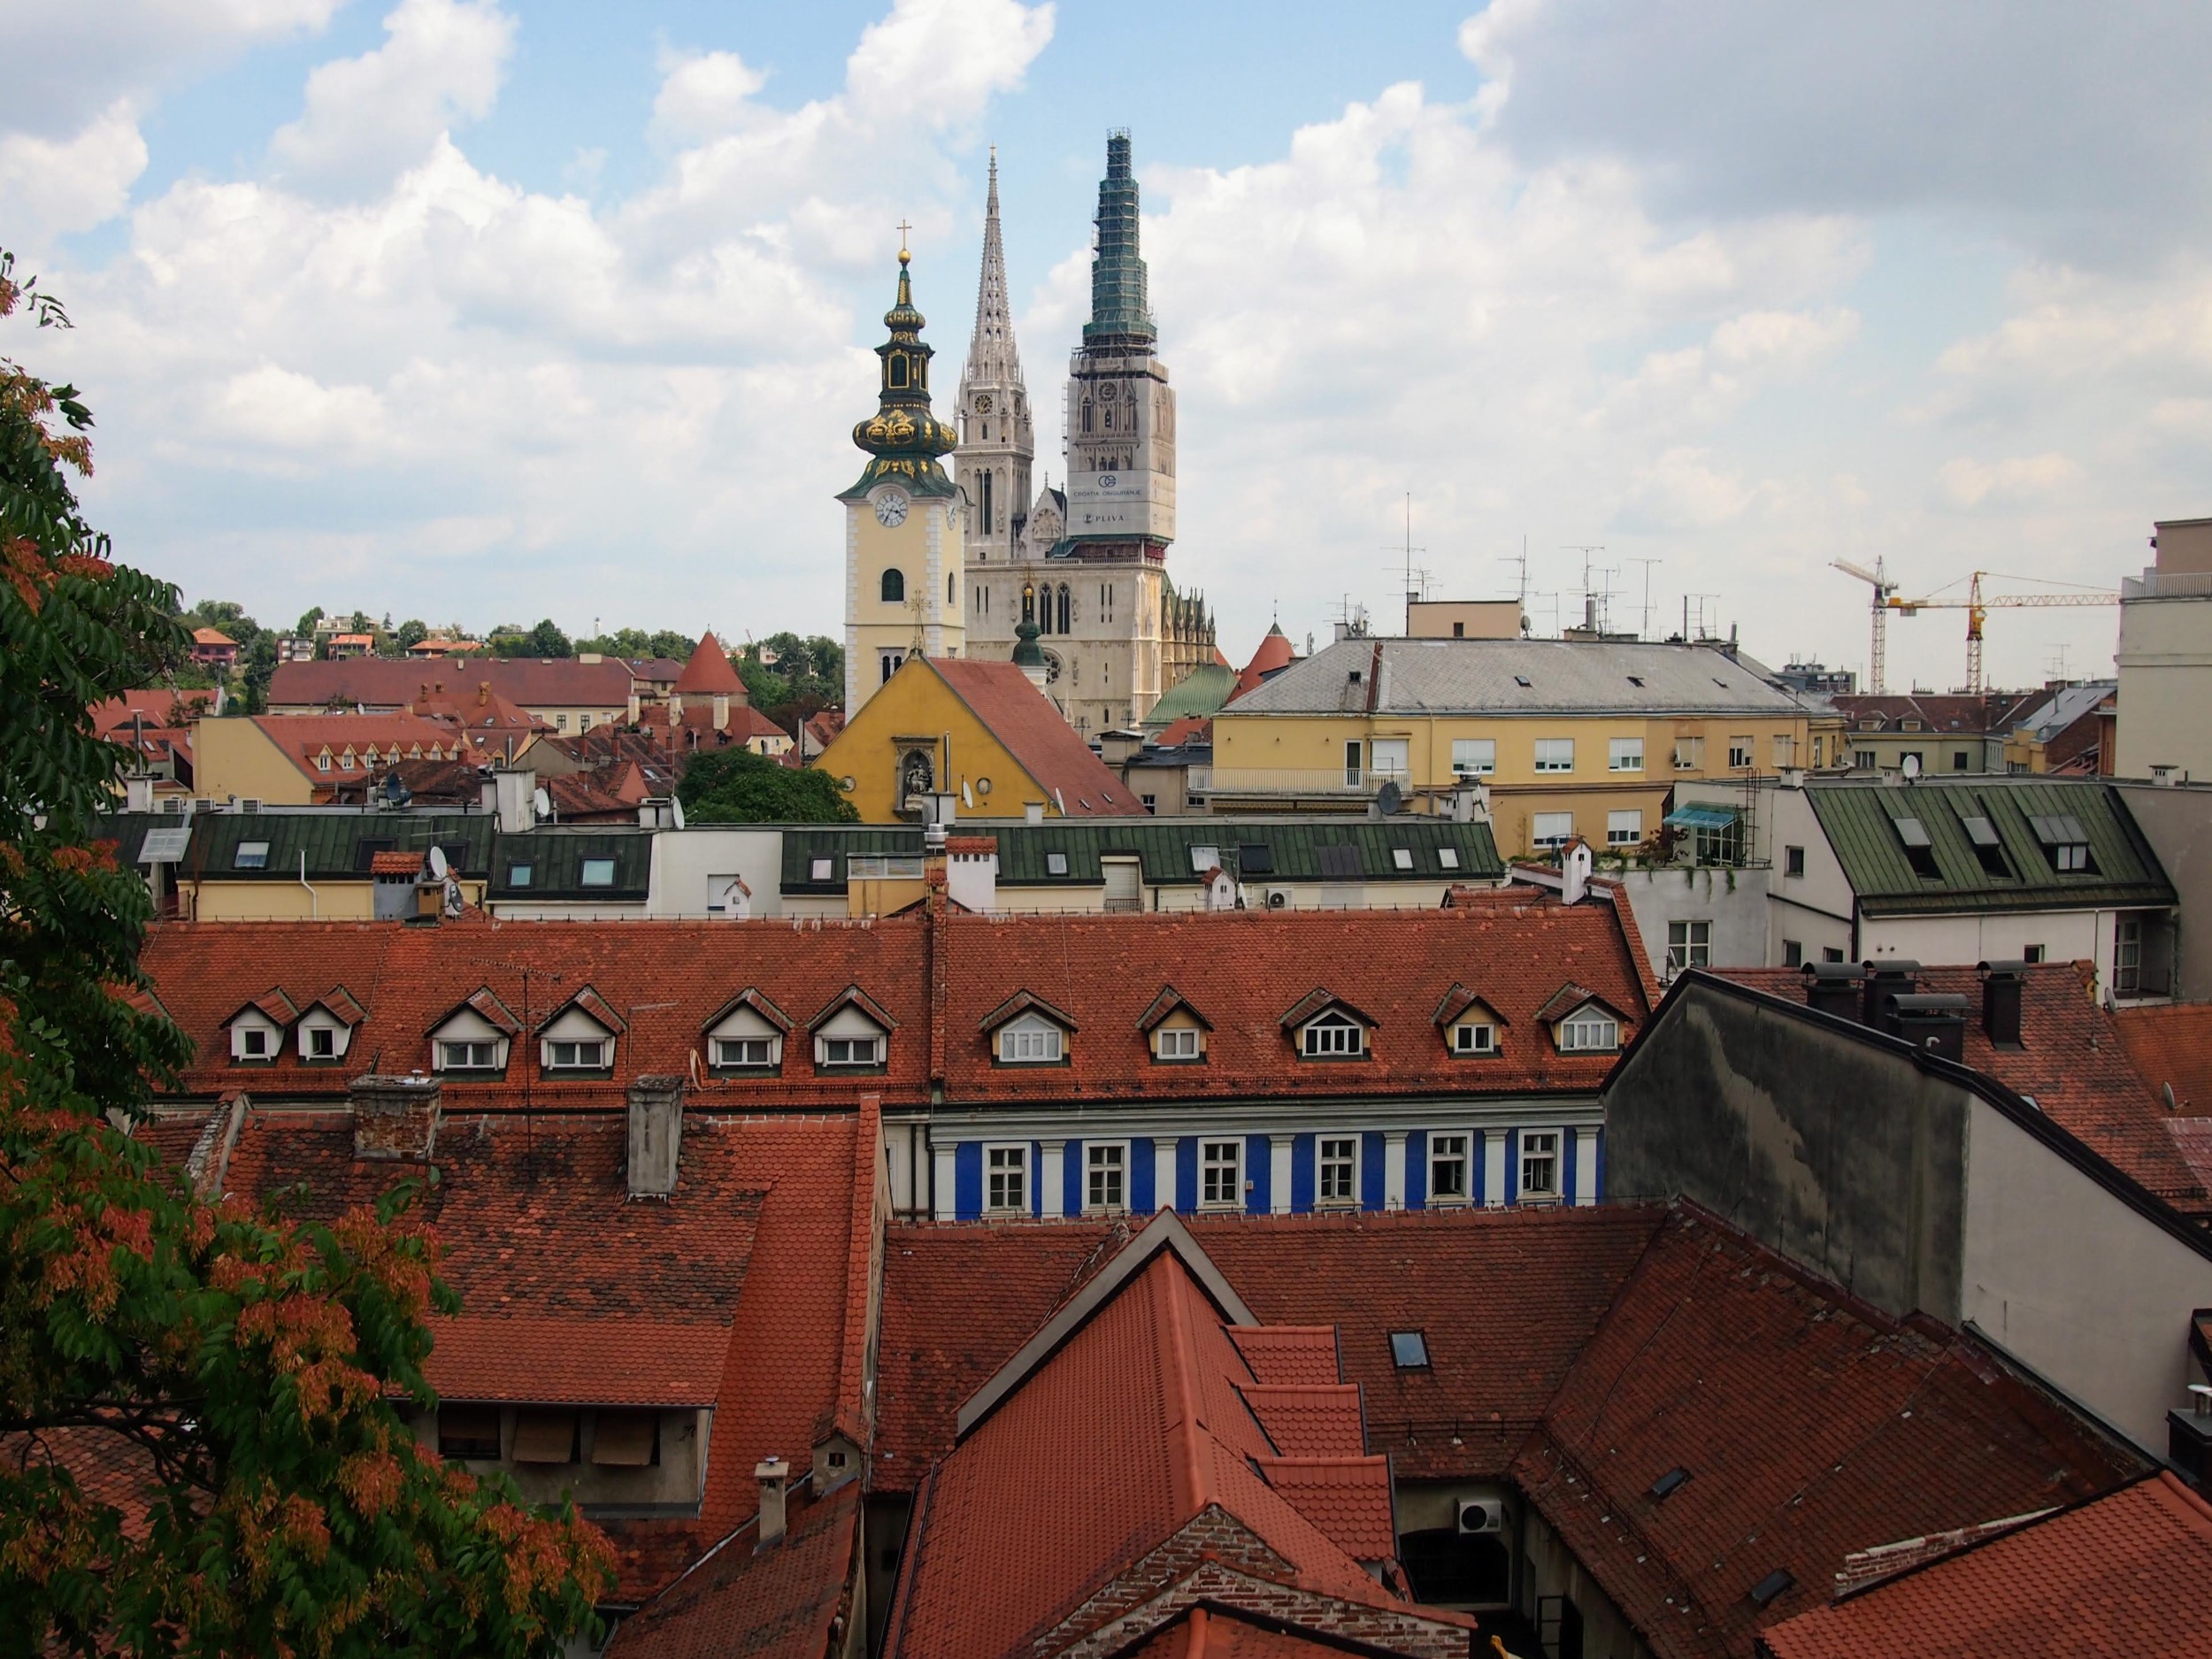 View over rooftops towards large church spires in Zagreb, Croatia